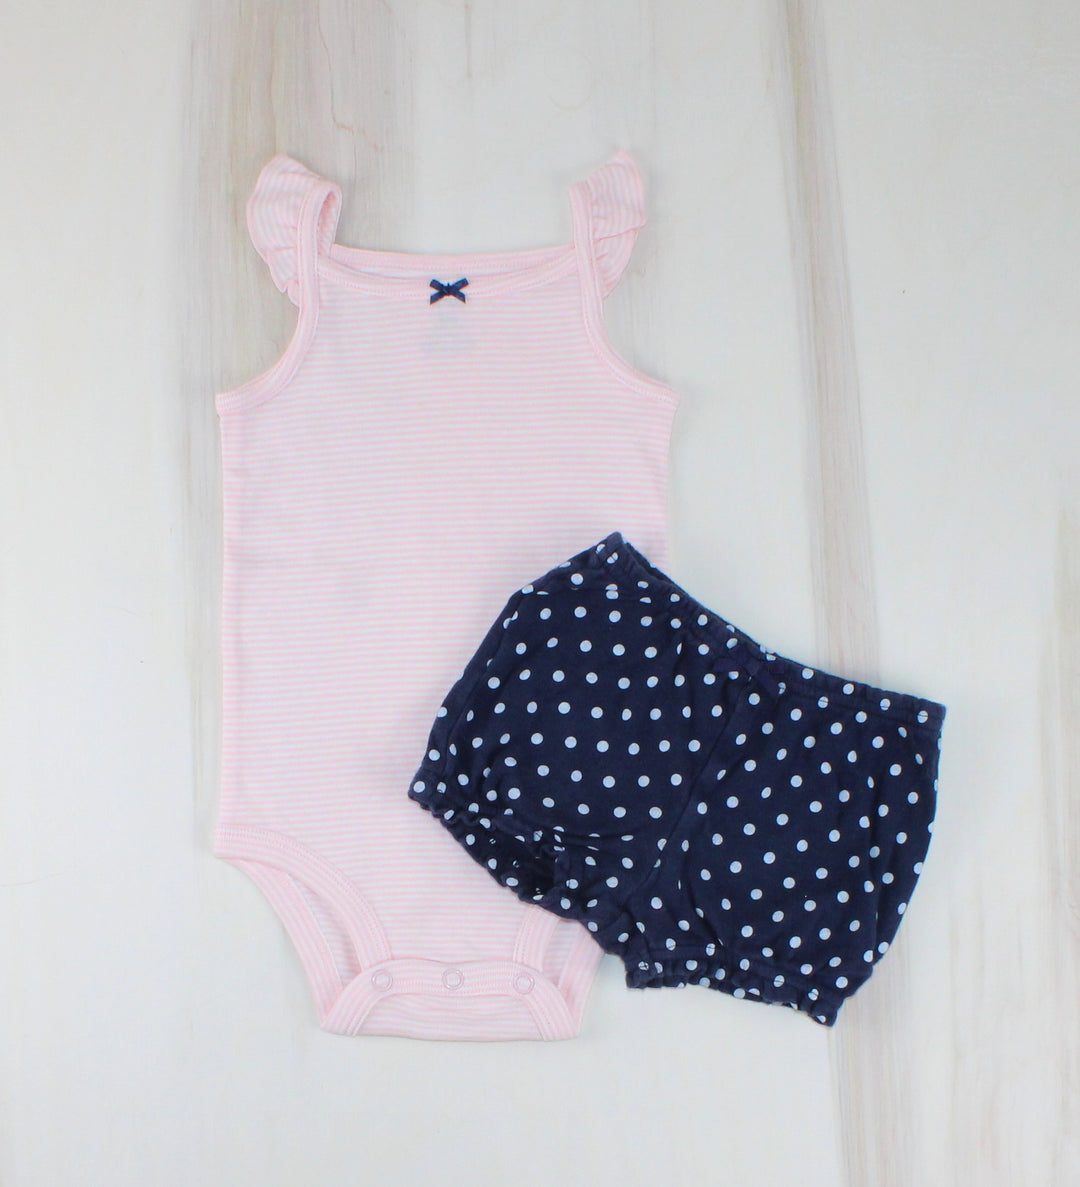 CARTERS PINK & NAVY OUTFIT 9M EUC